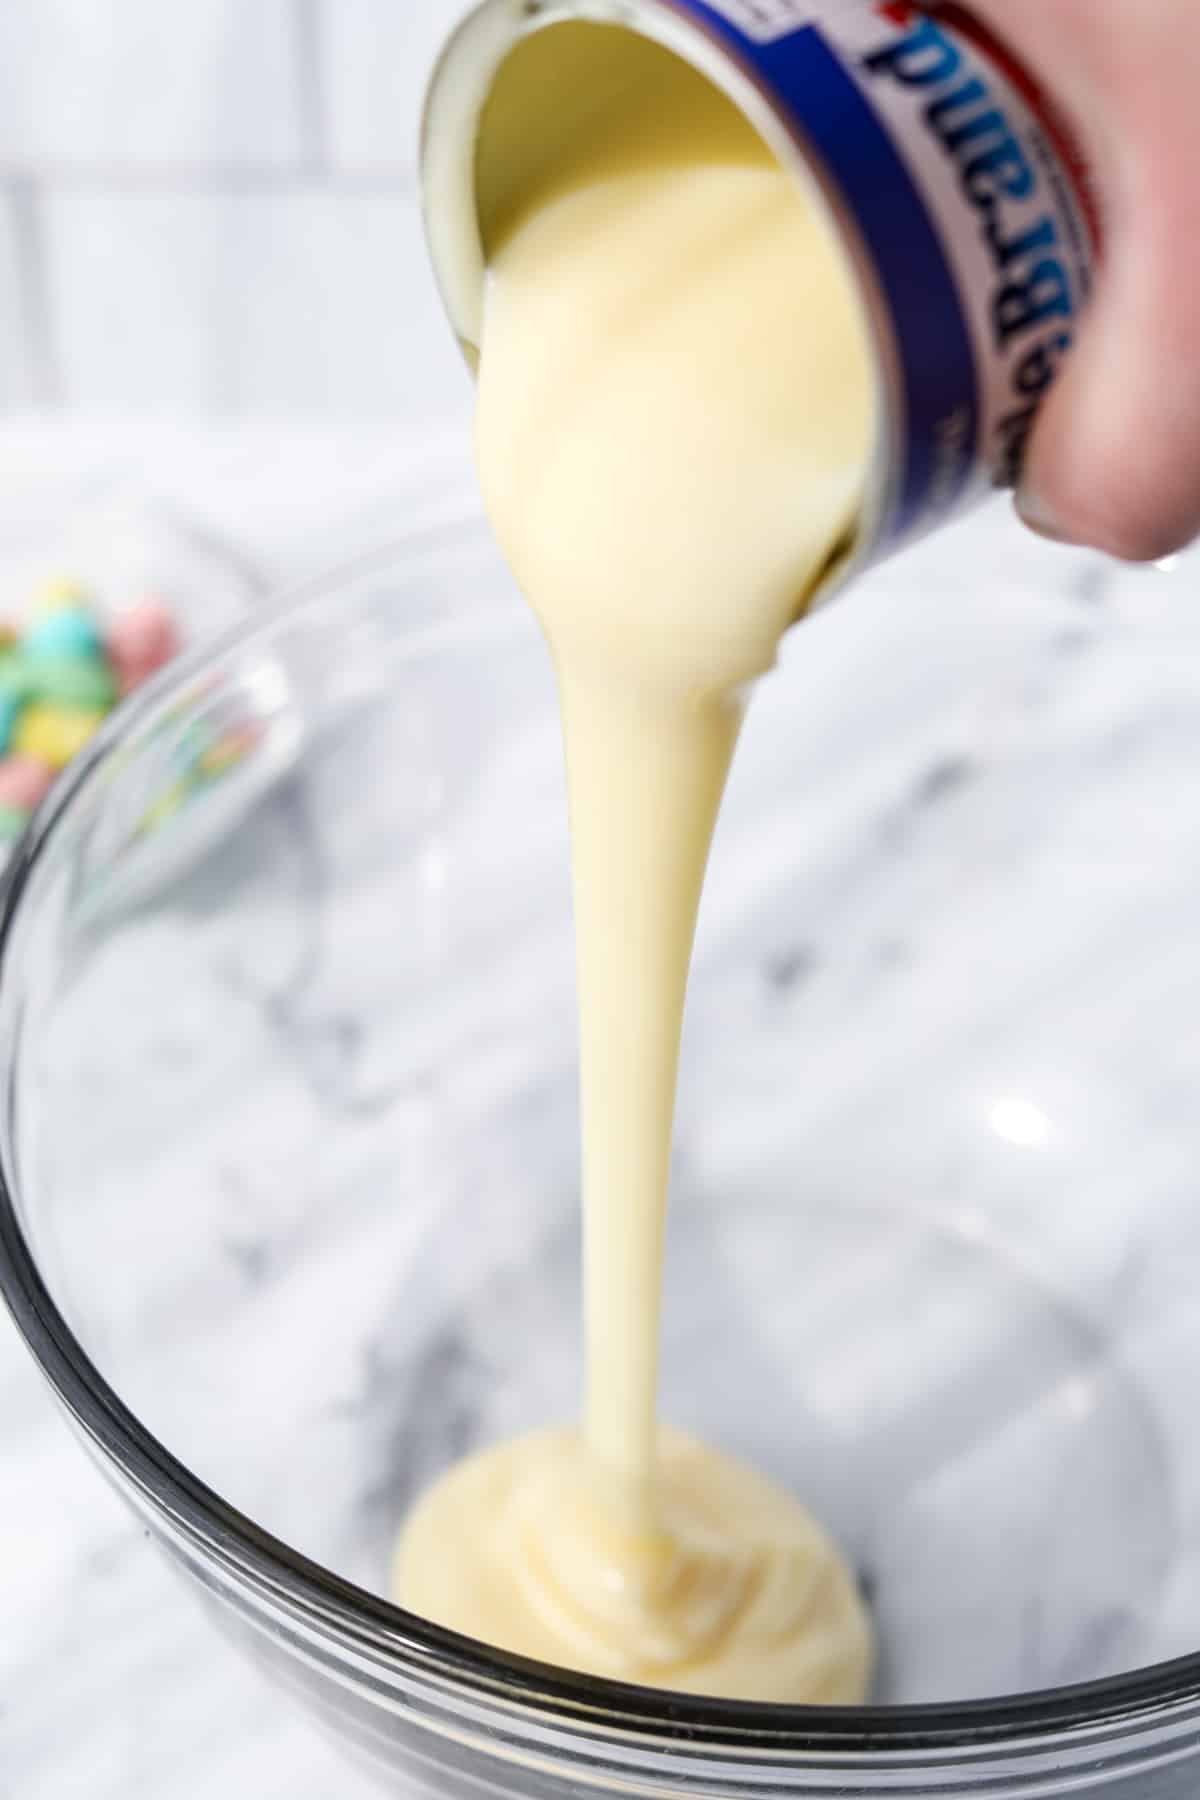 Pouring sweetened condensed milk into a bowl.